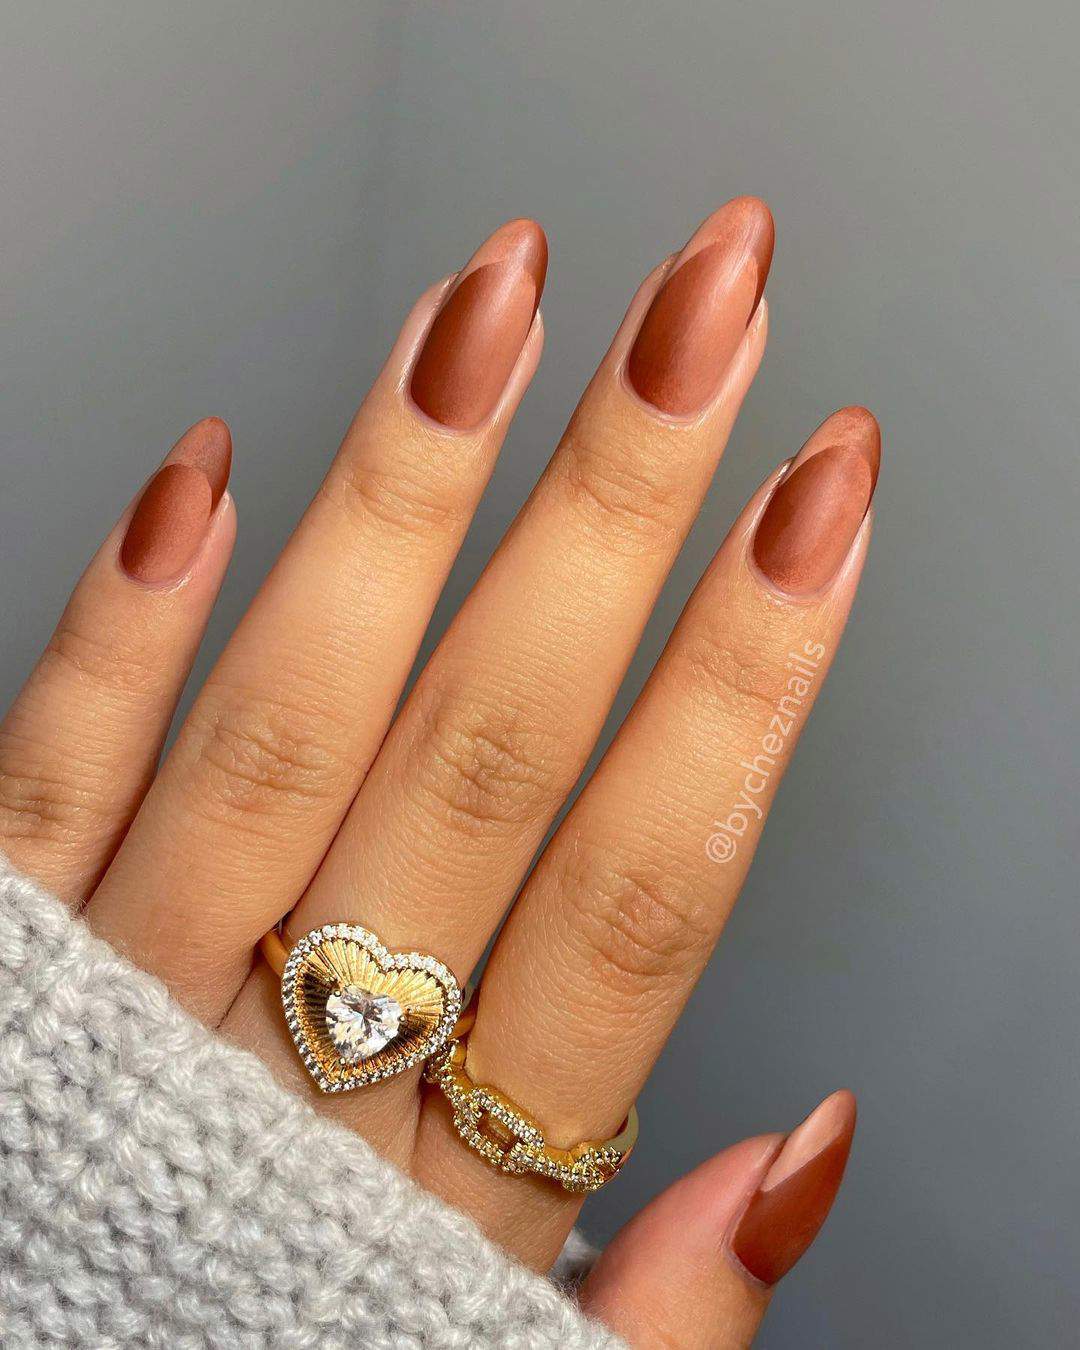 French nails illusion: camel